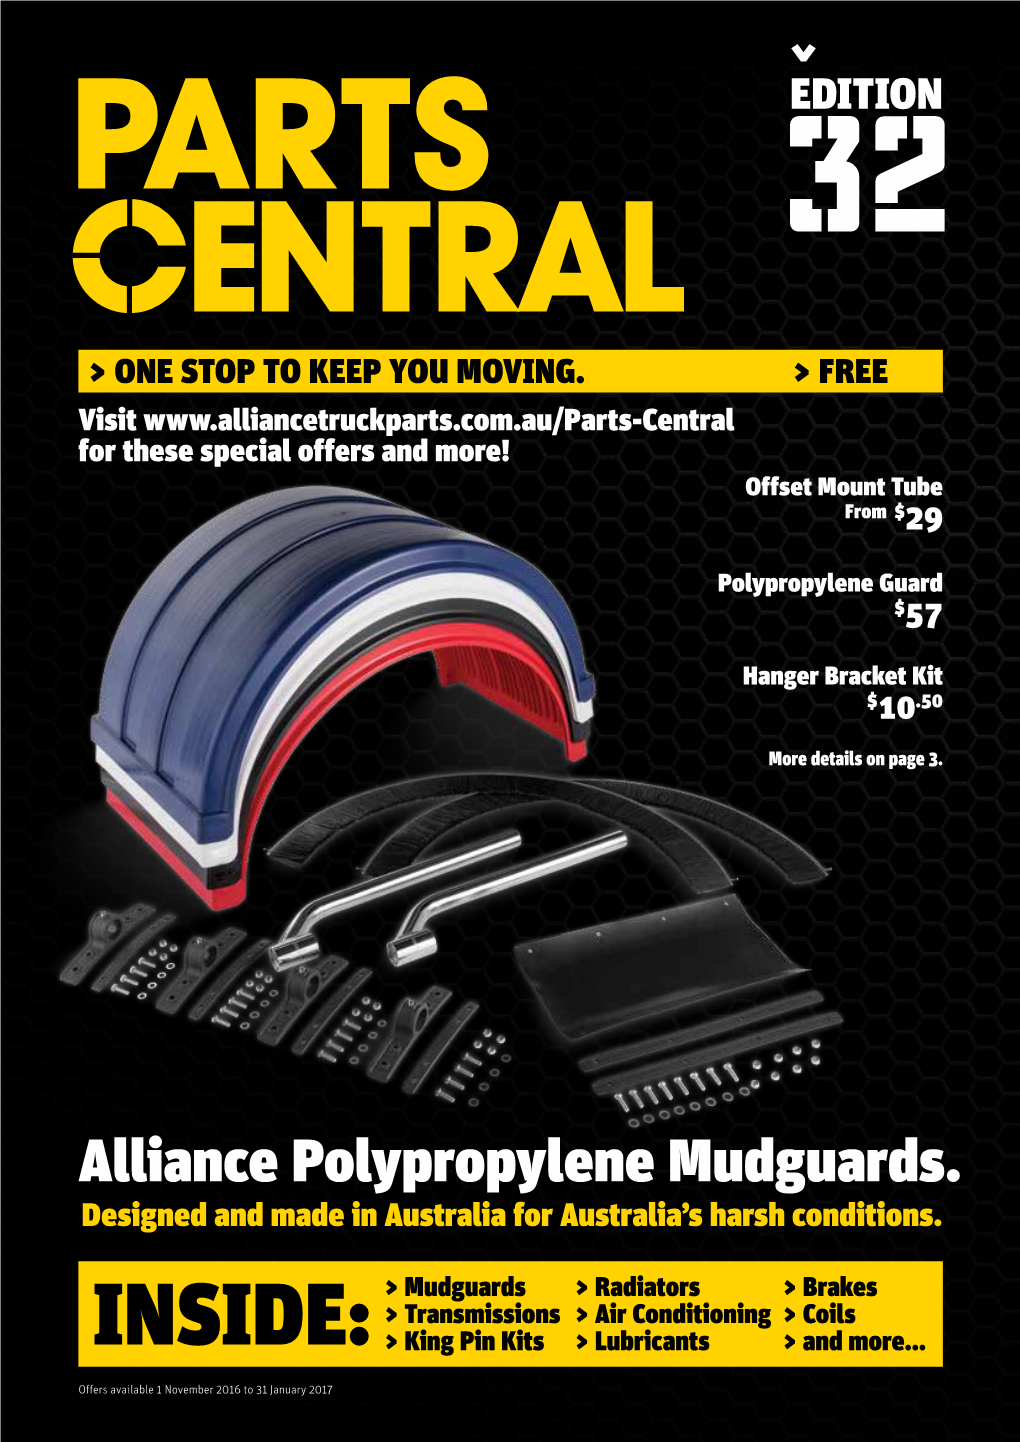 Alliance Polypropylene Mudguards. Designed and Made in Australia for Australia’S Harsh Conditions